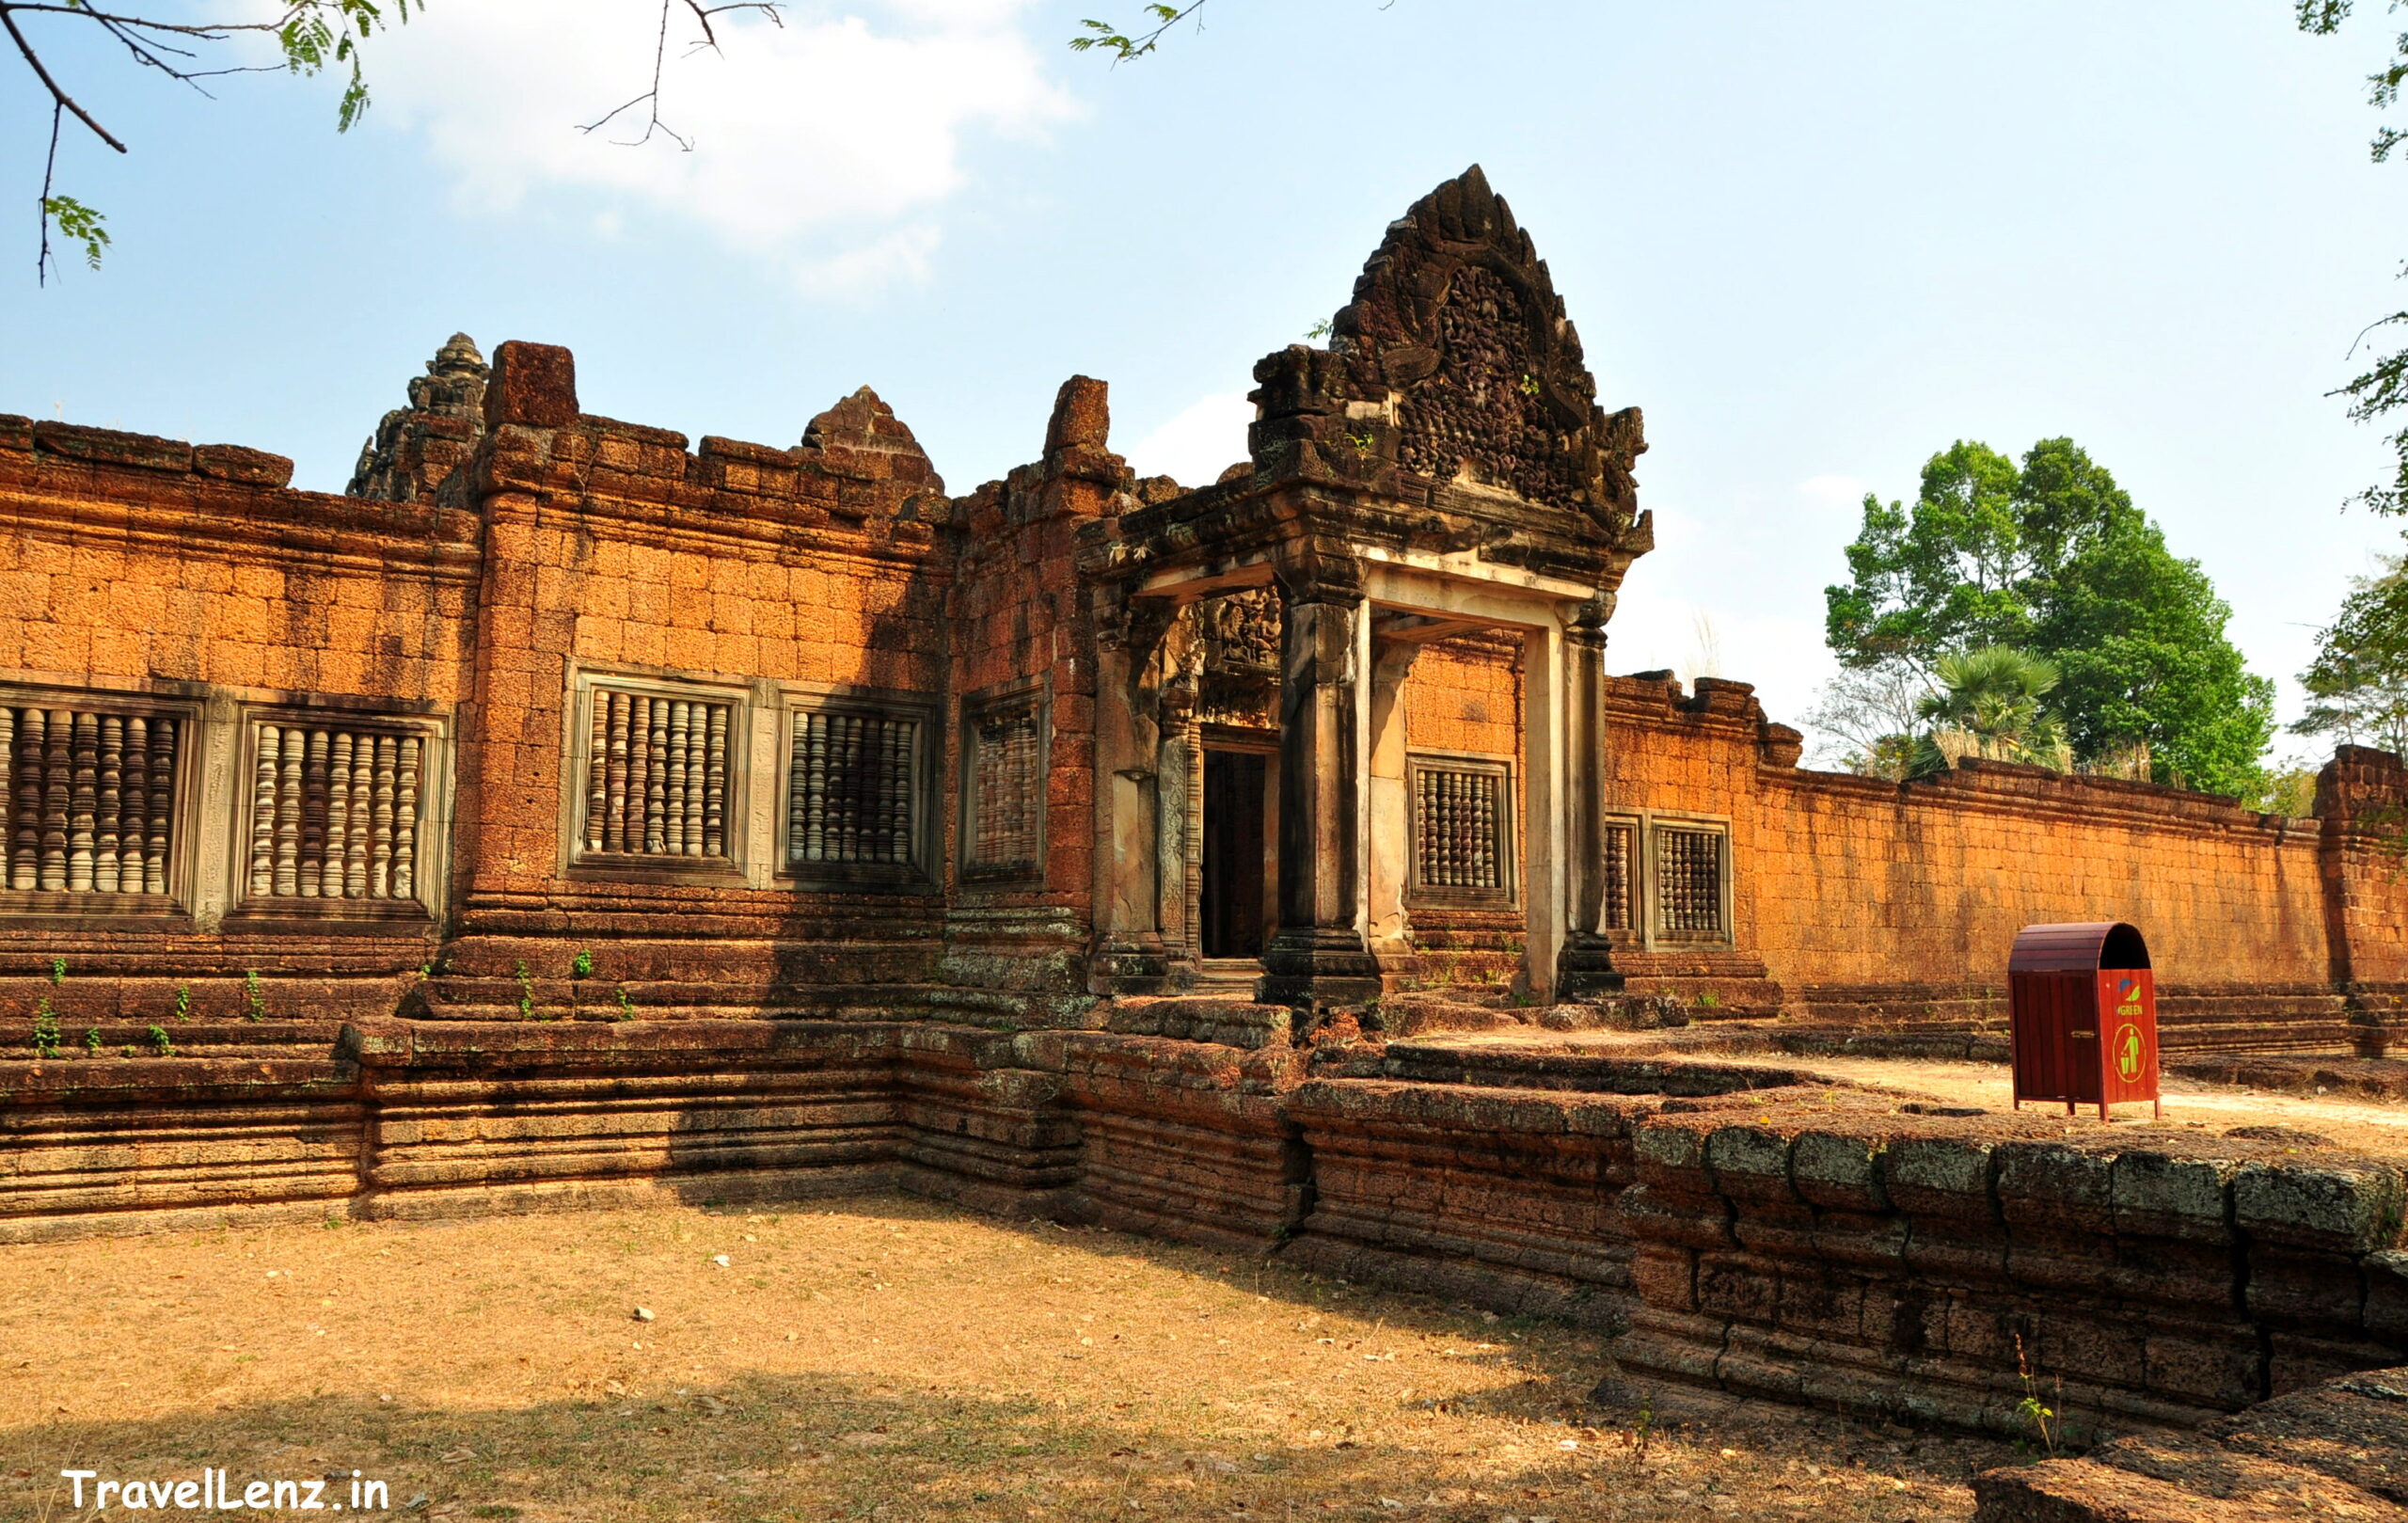 Banteay Samre - Outer enclosure and entrance door